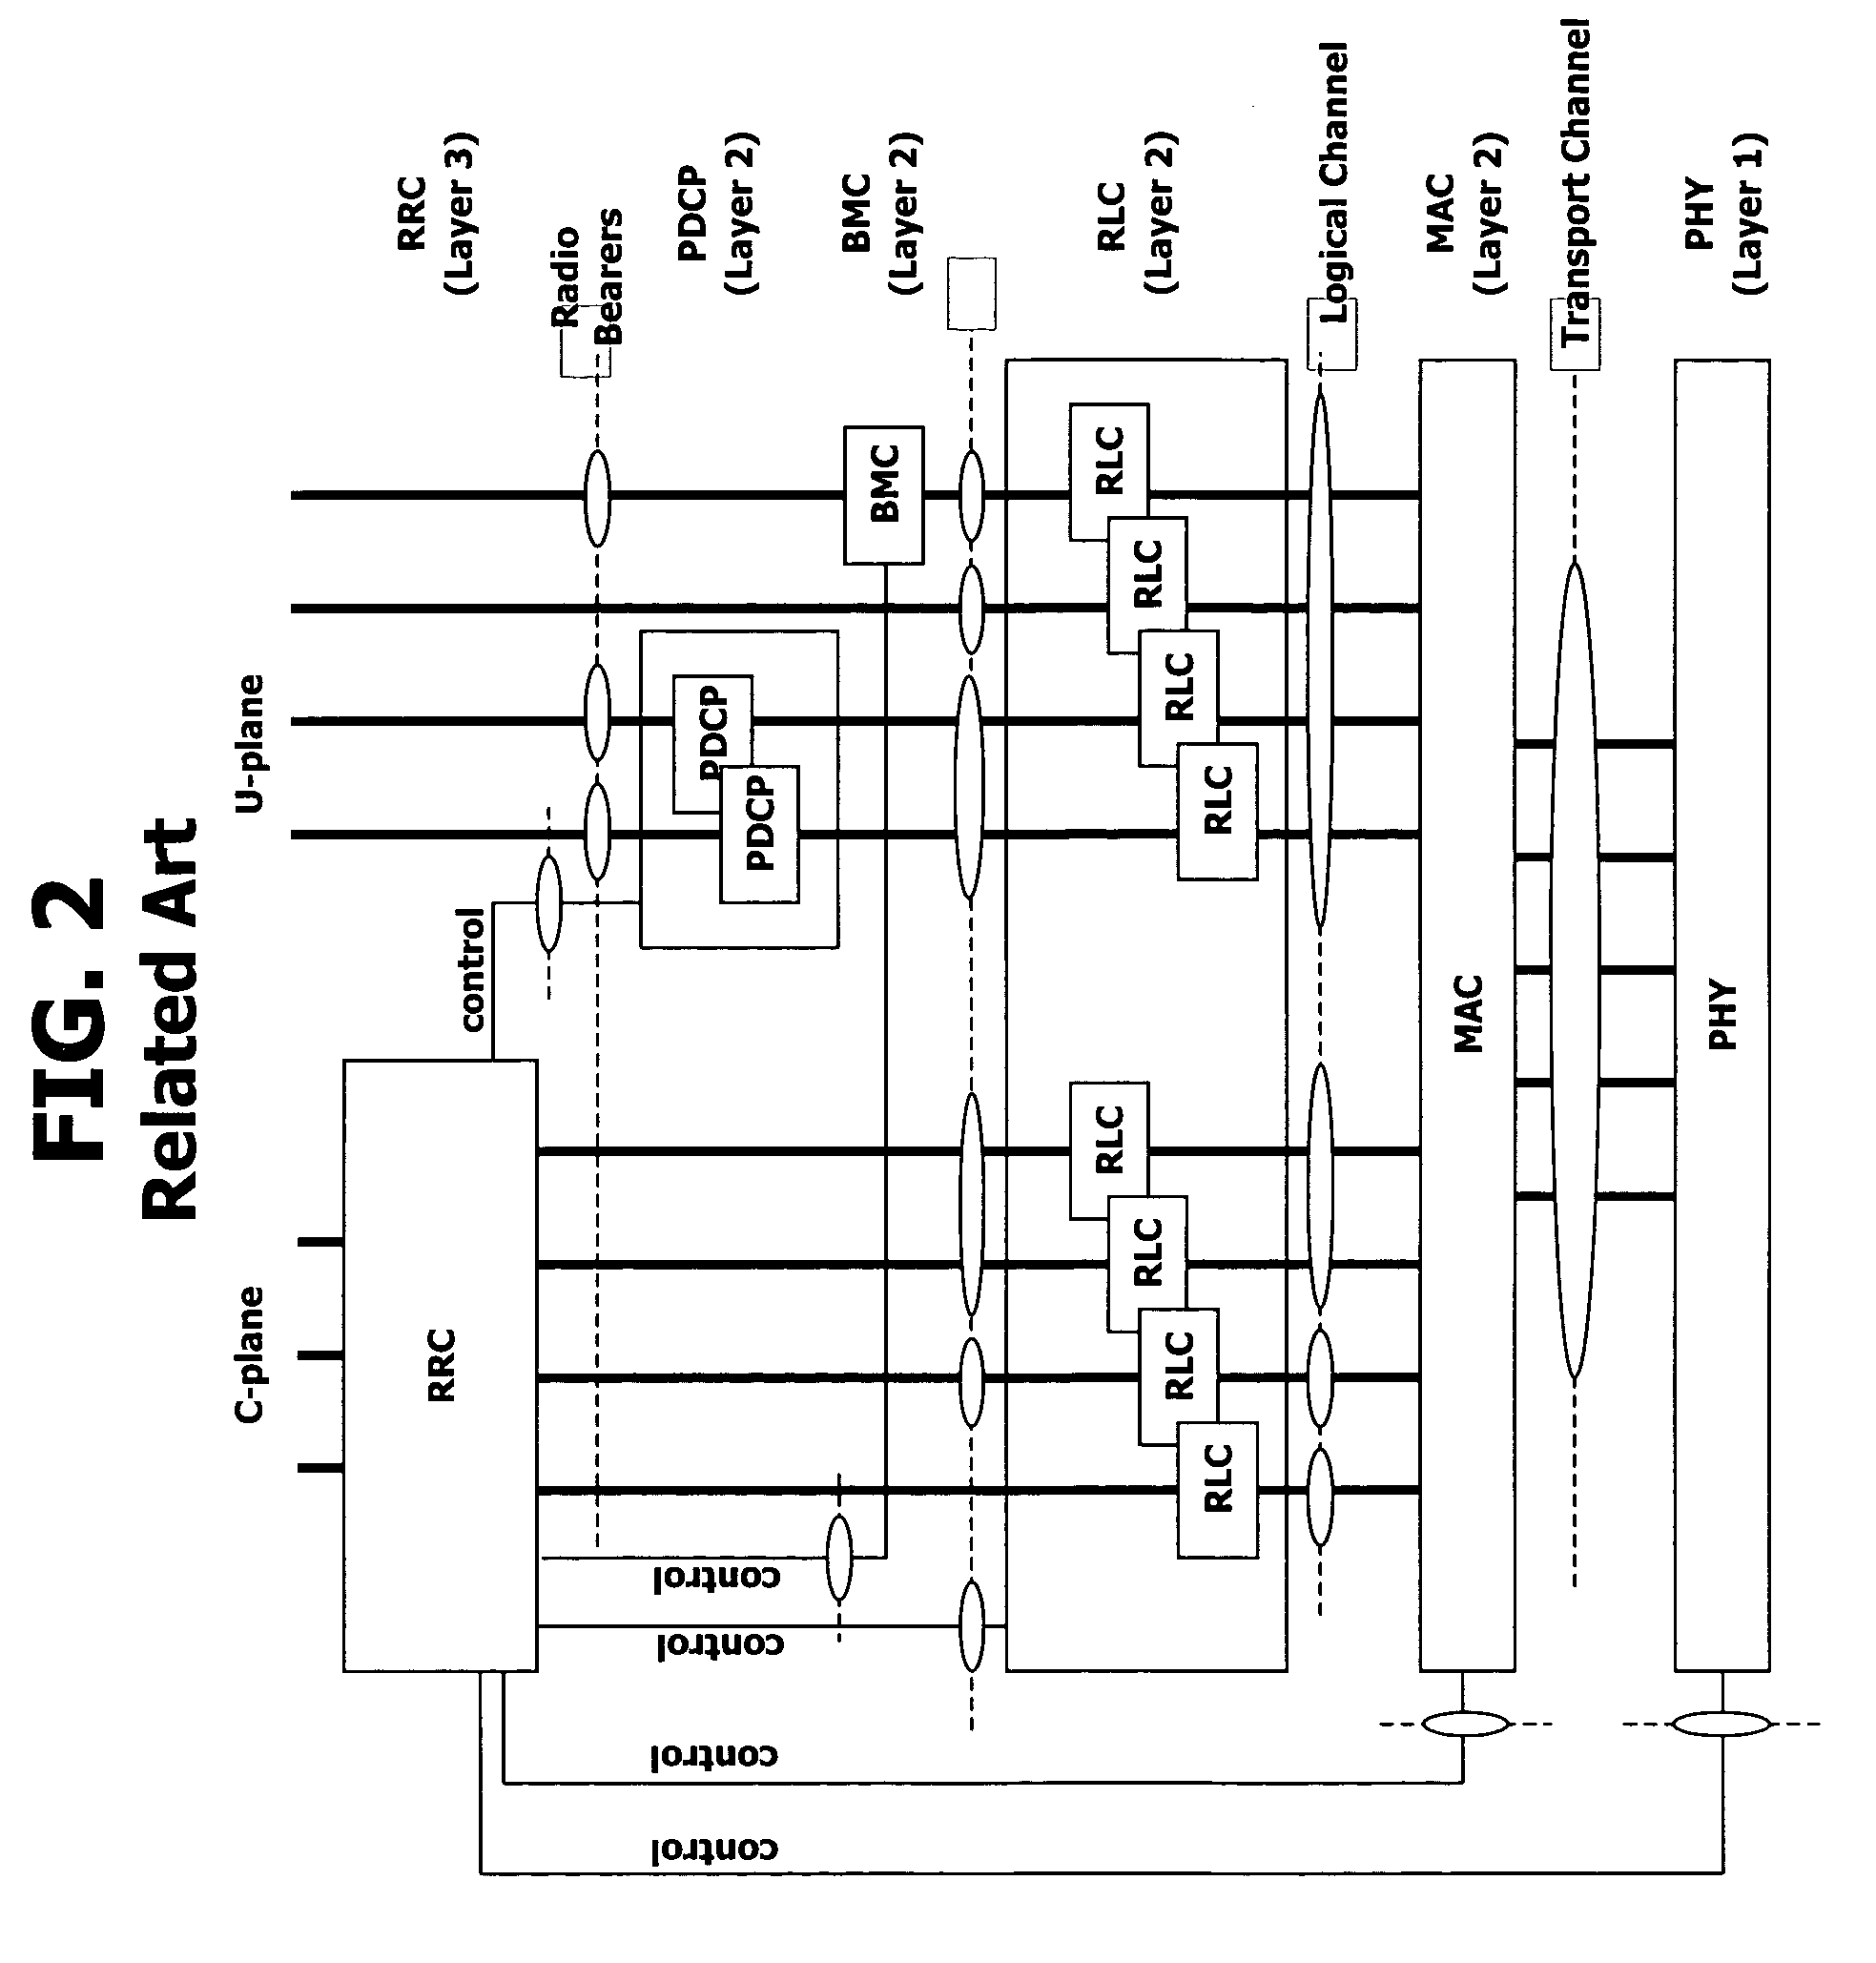 Apparatus and method for establishing feedback in a broadcast or multicast service